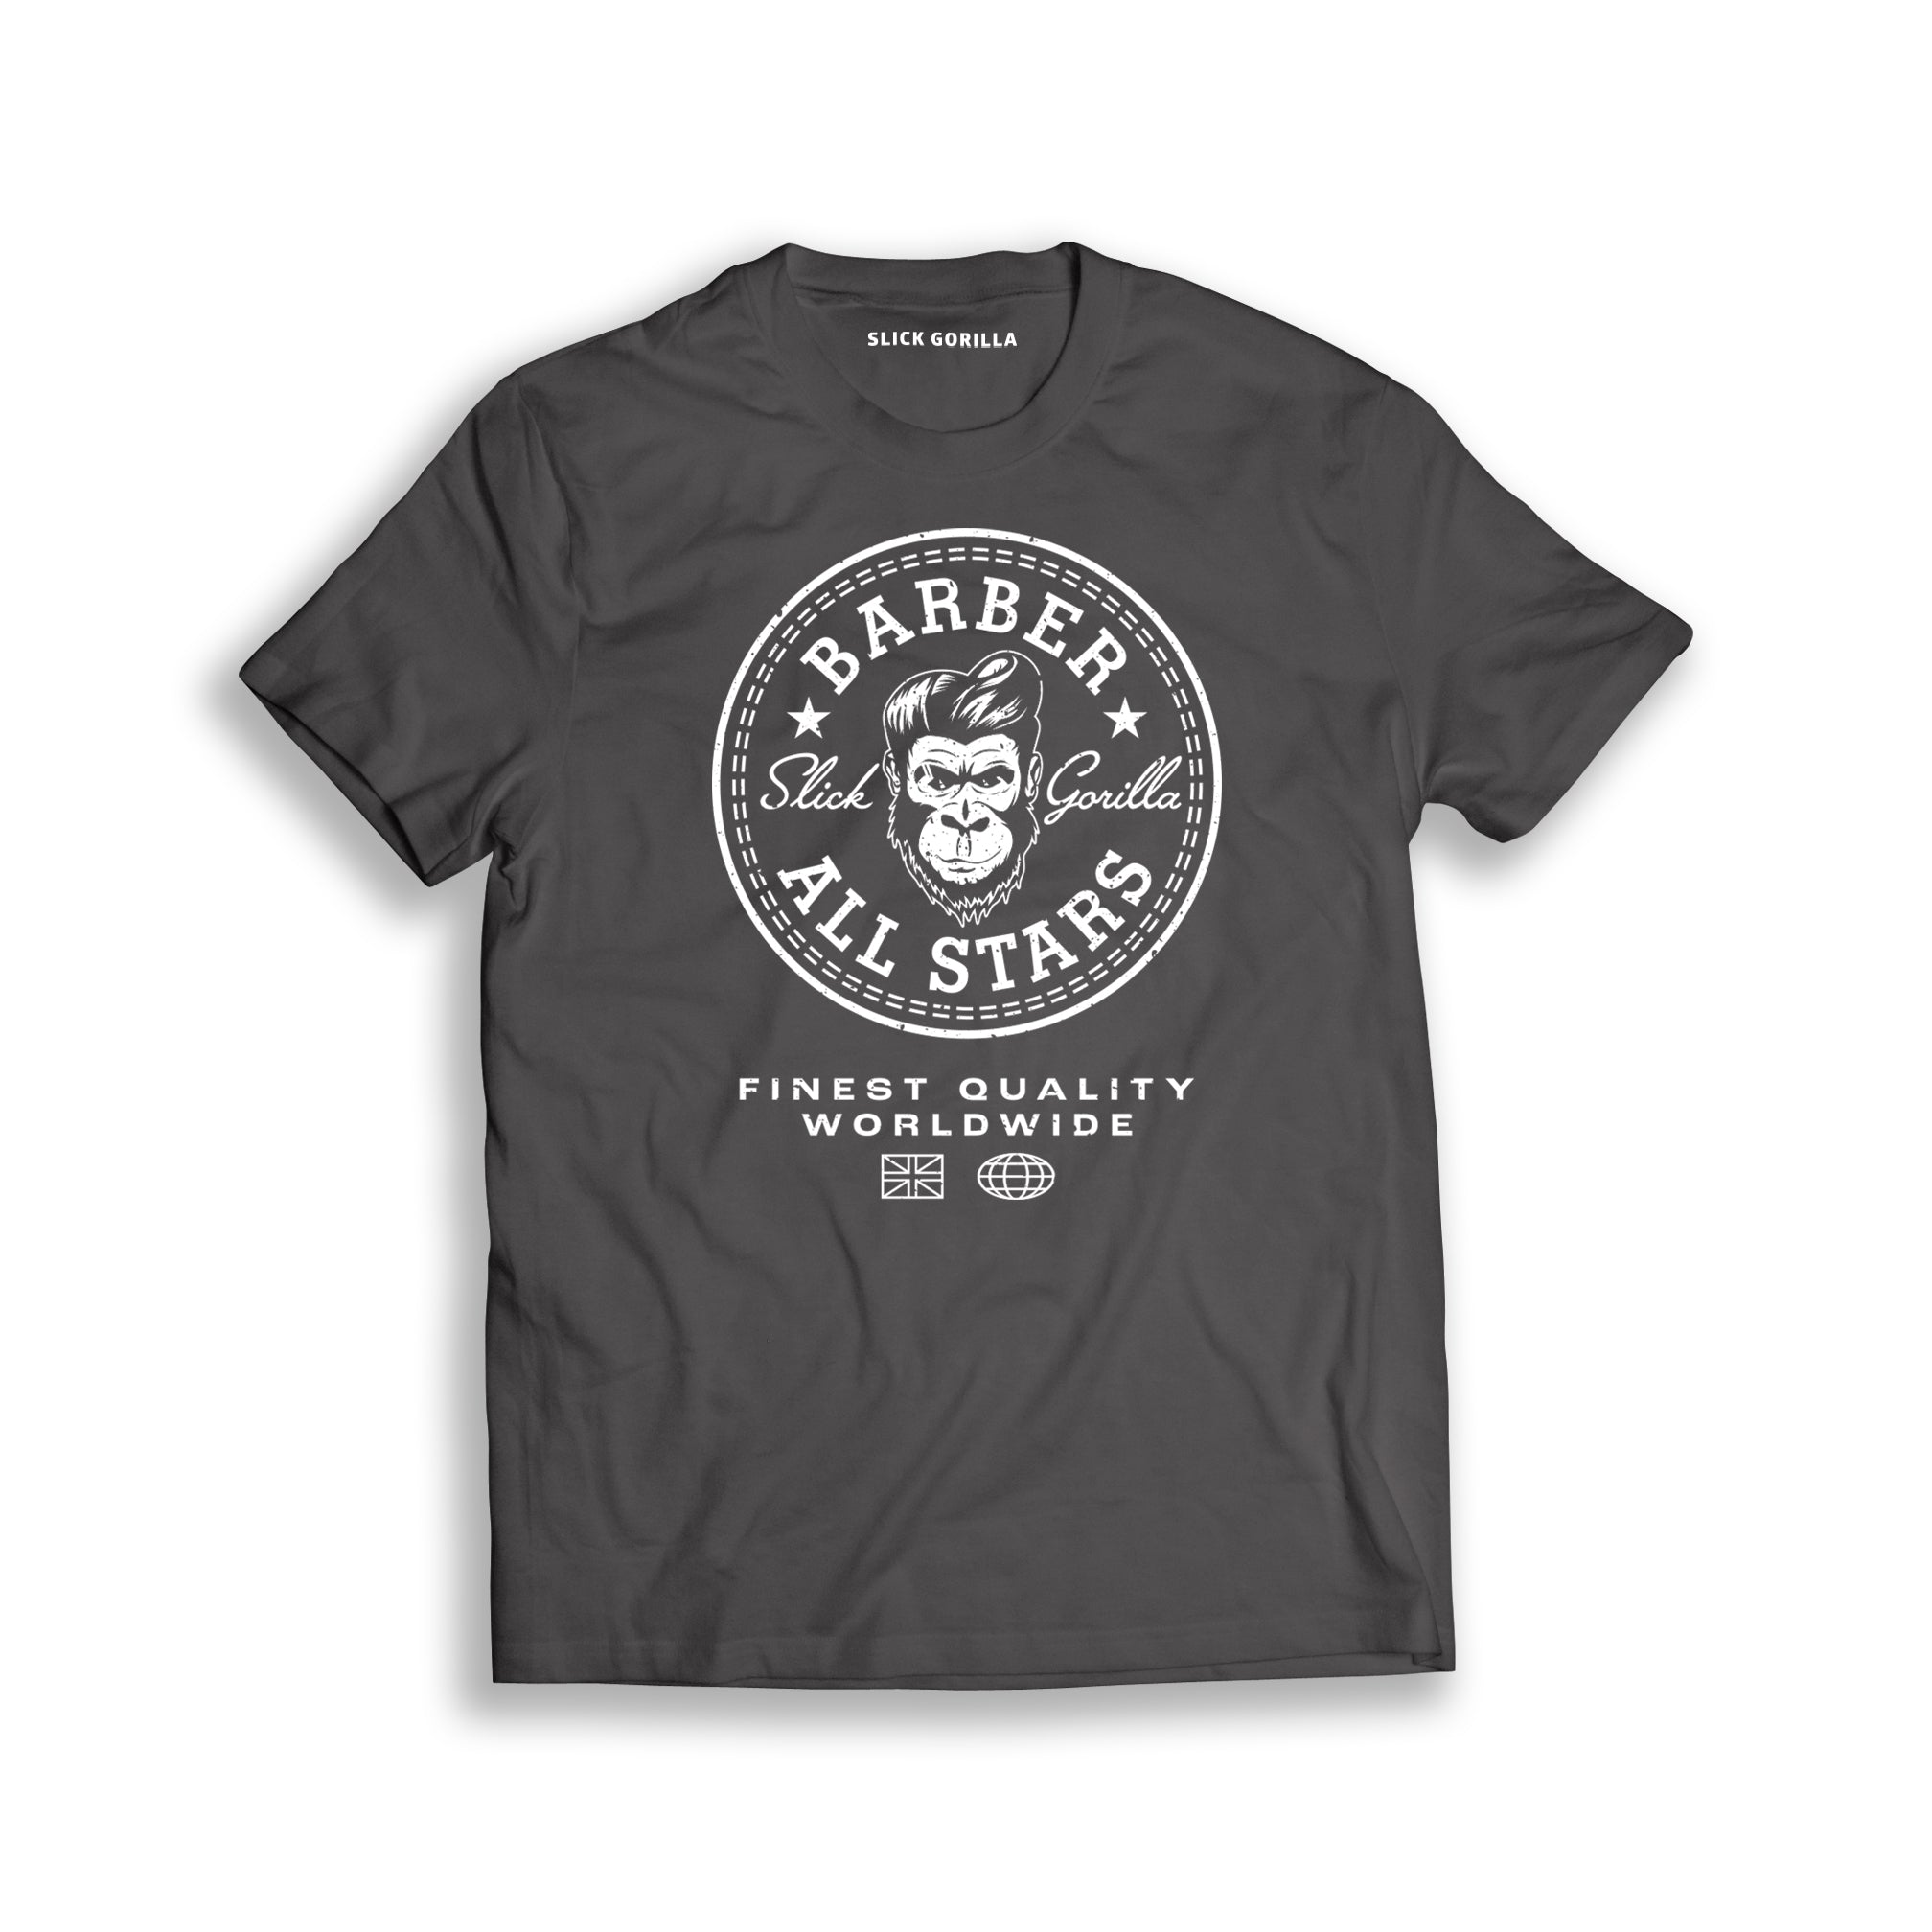 Barber All Star T-shirt Charcoal